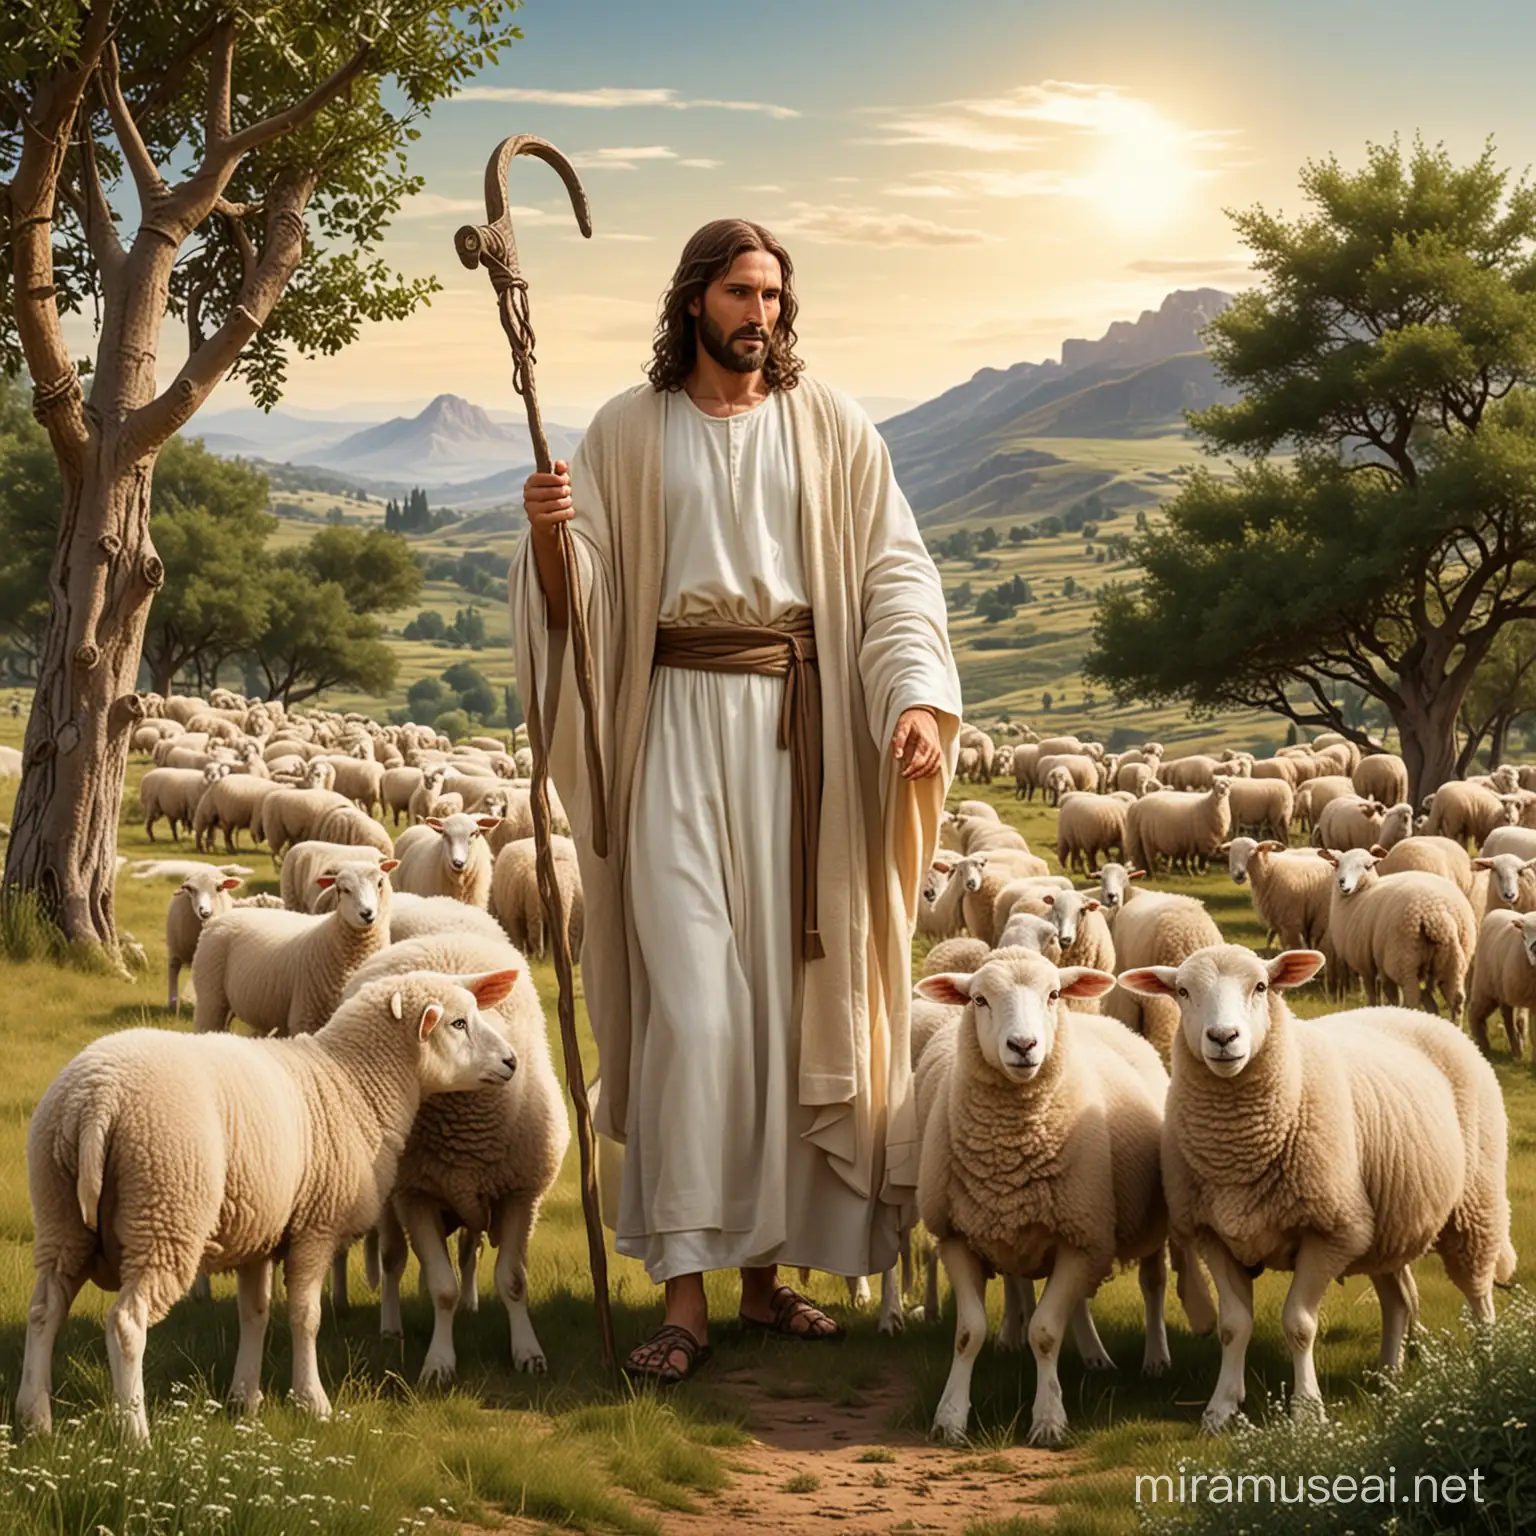 Jesus Christ with Sheep and Shepherds Crook in a Serene Wilderness